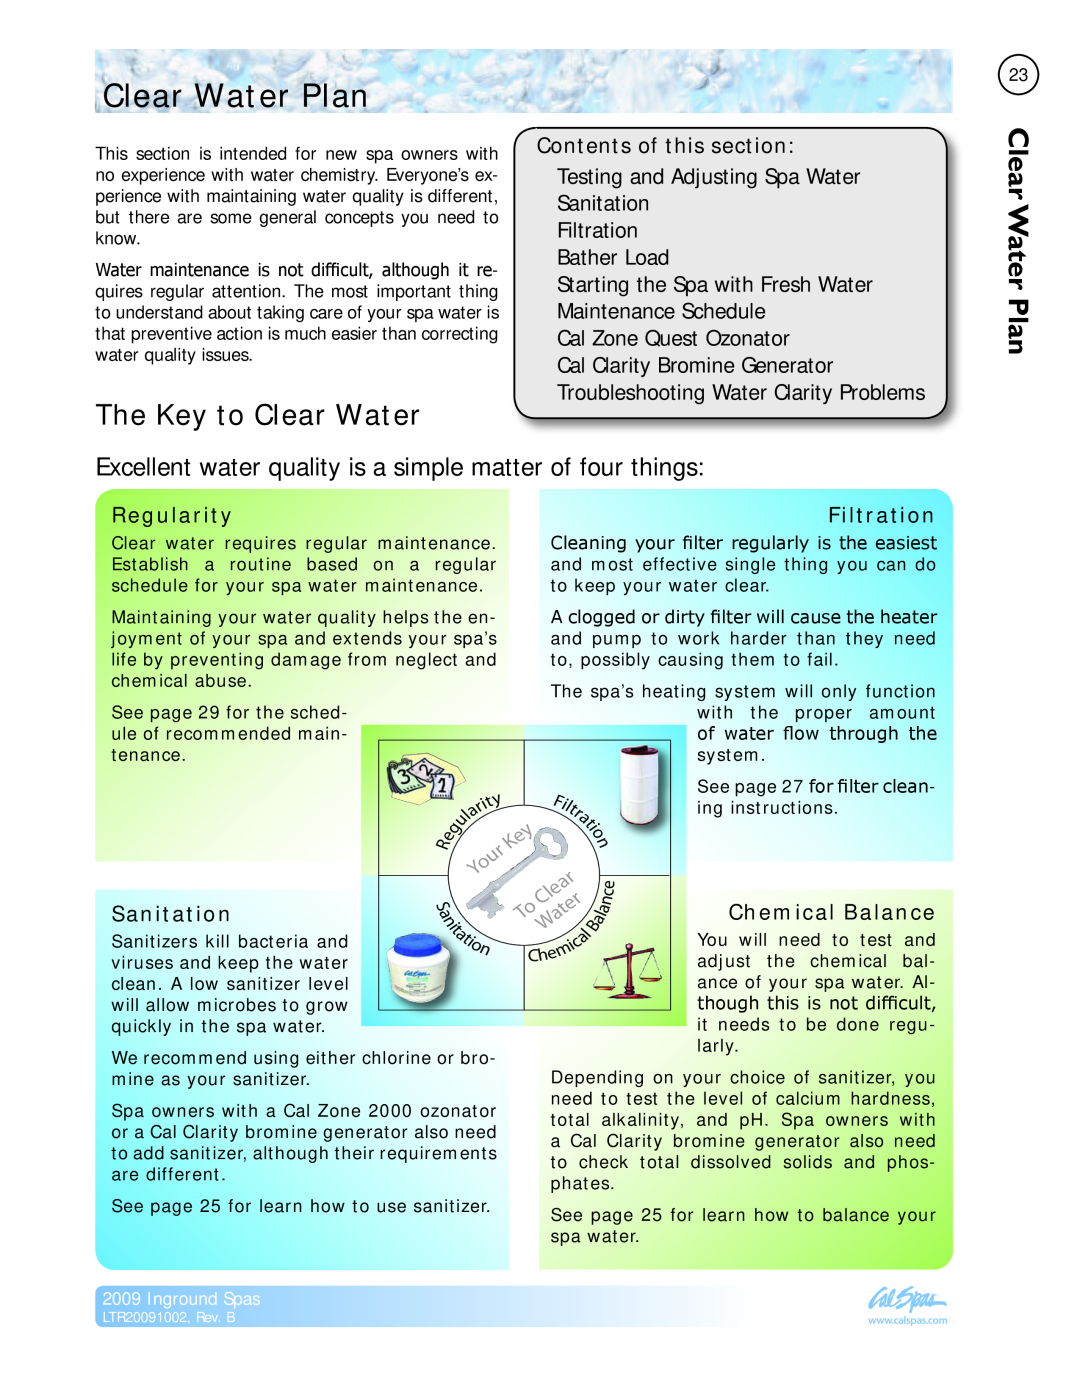 Cal Spas Inground Spas manual Clear Water Plan, The Key to Clear Water 